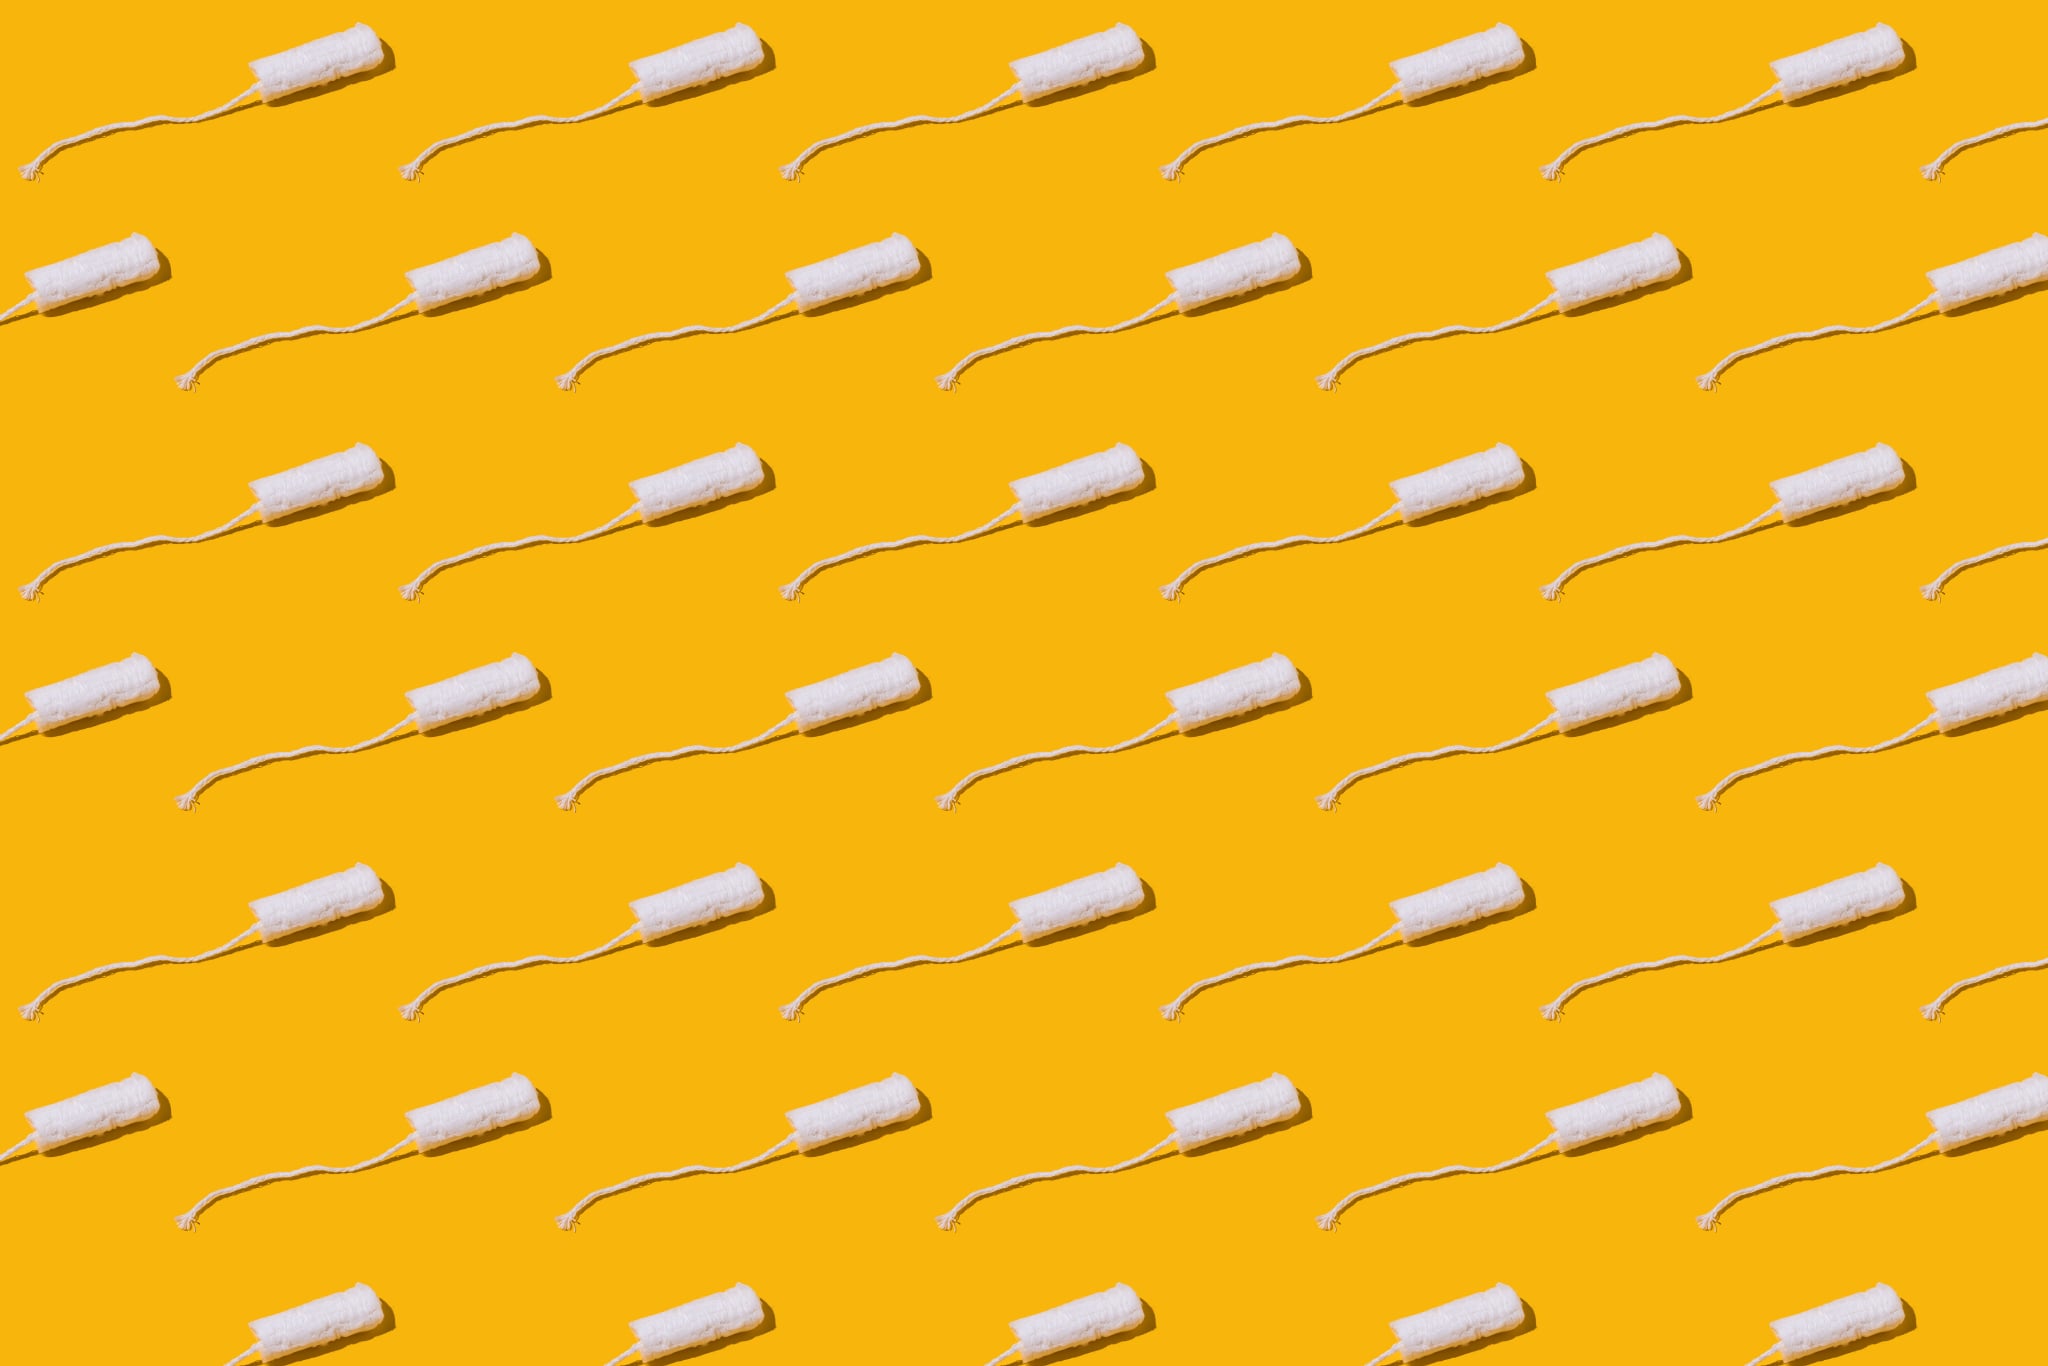 Cellulose white tampon pattern with twine on yellow background. Concept of menstruation, ovulation, reproduction, pain and personal hygiene.